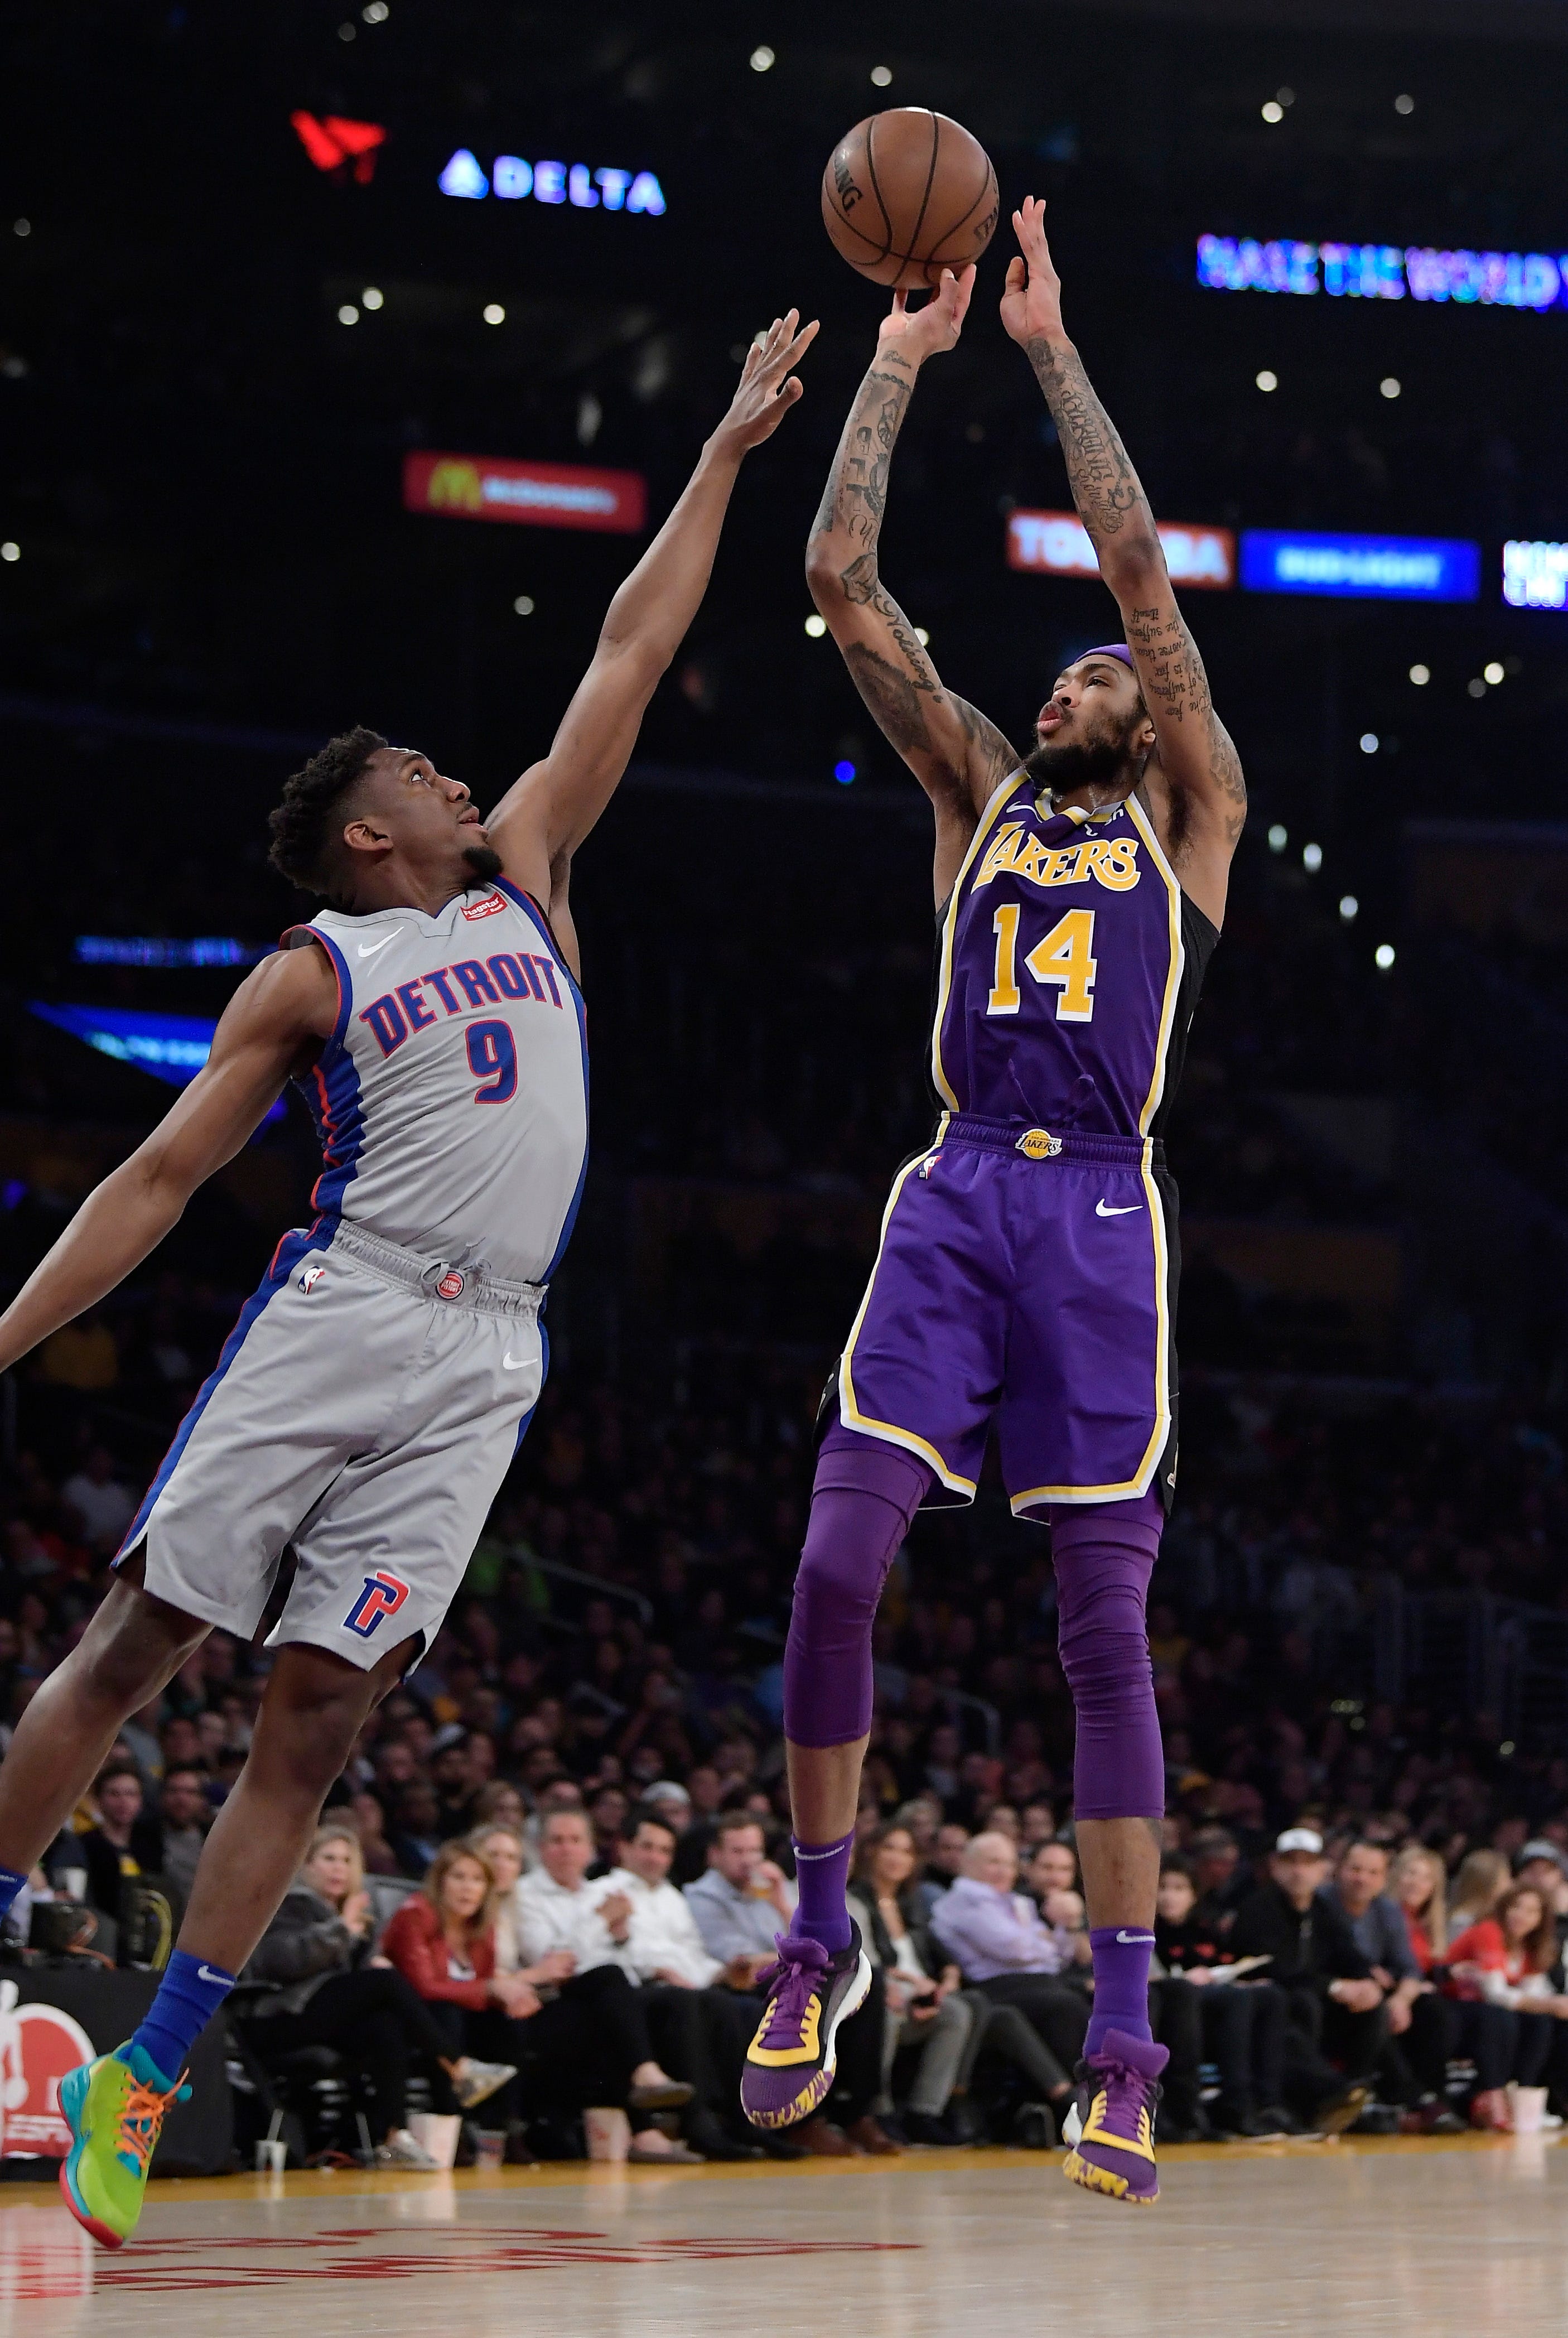 Los Angeles Lakers forward Brandon Ingram, right, shoots as Detroit Pistons guard Langston Galloway defends during the second half.